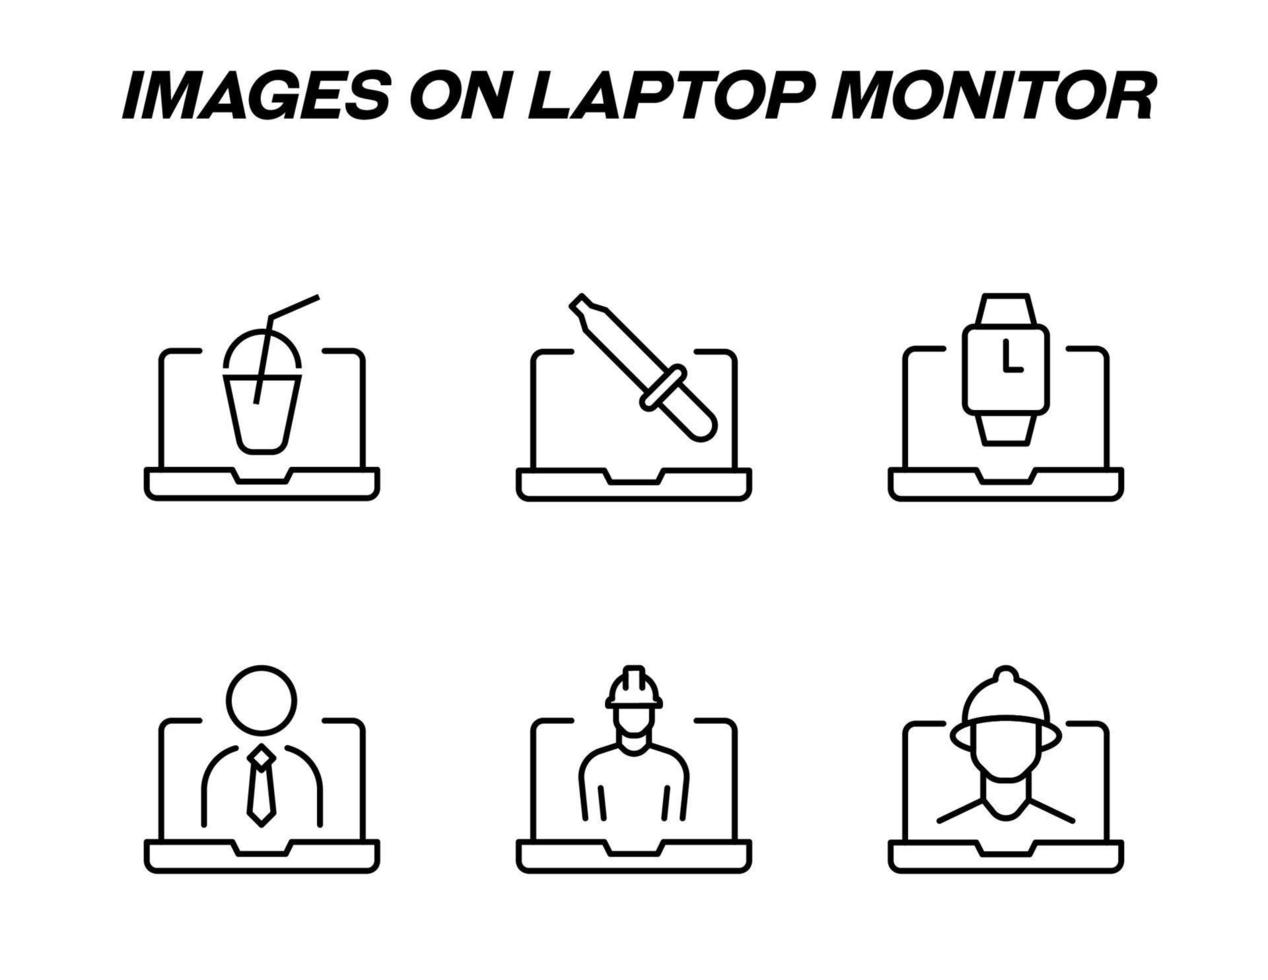 Items on laptop monitor pack. Modern vector monochrome signs. Line icon set with icons of soda, eyedropper, wristwatch, office worker, builder on laptop monitor